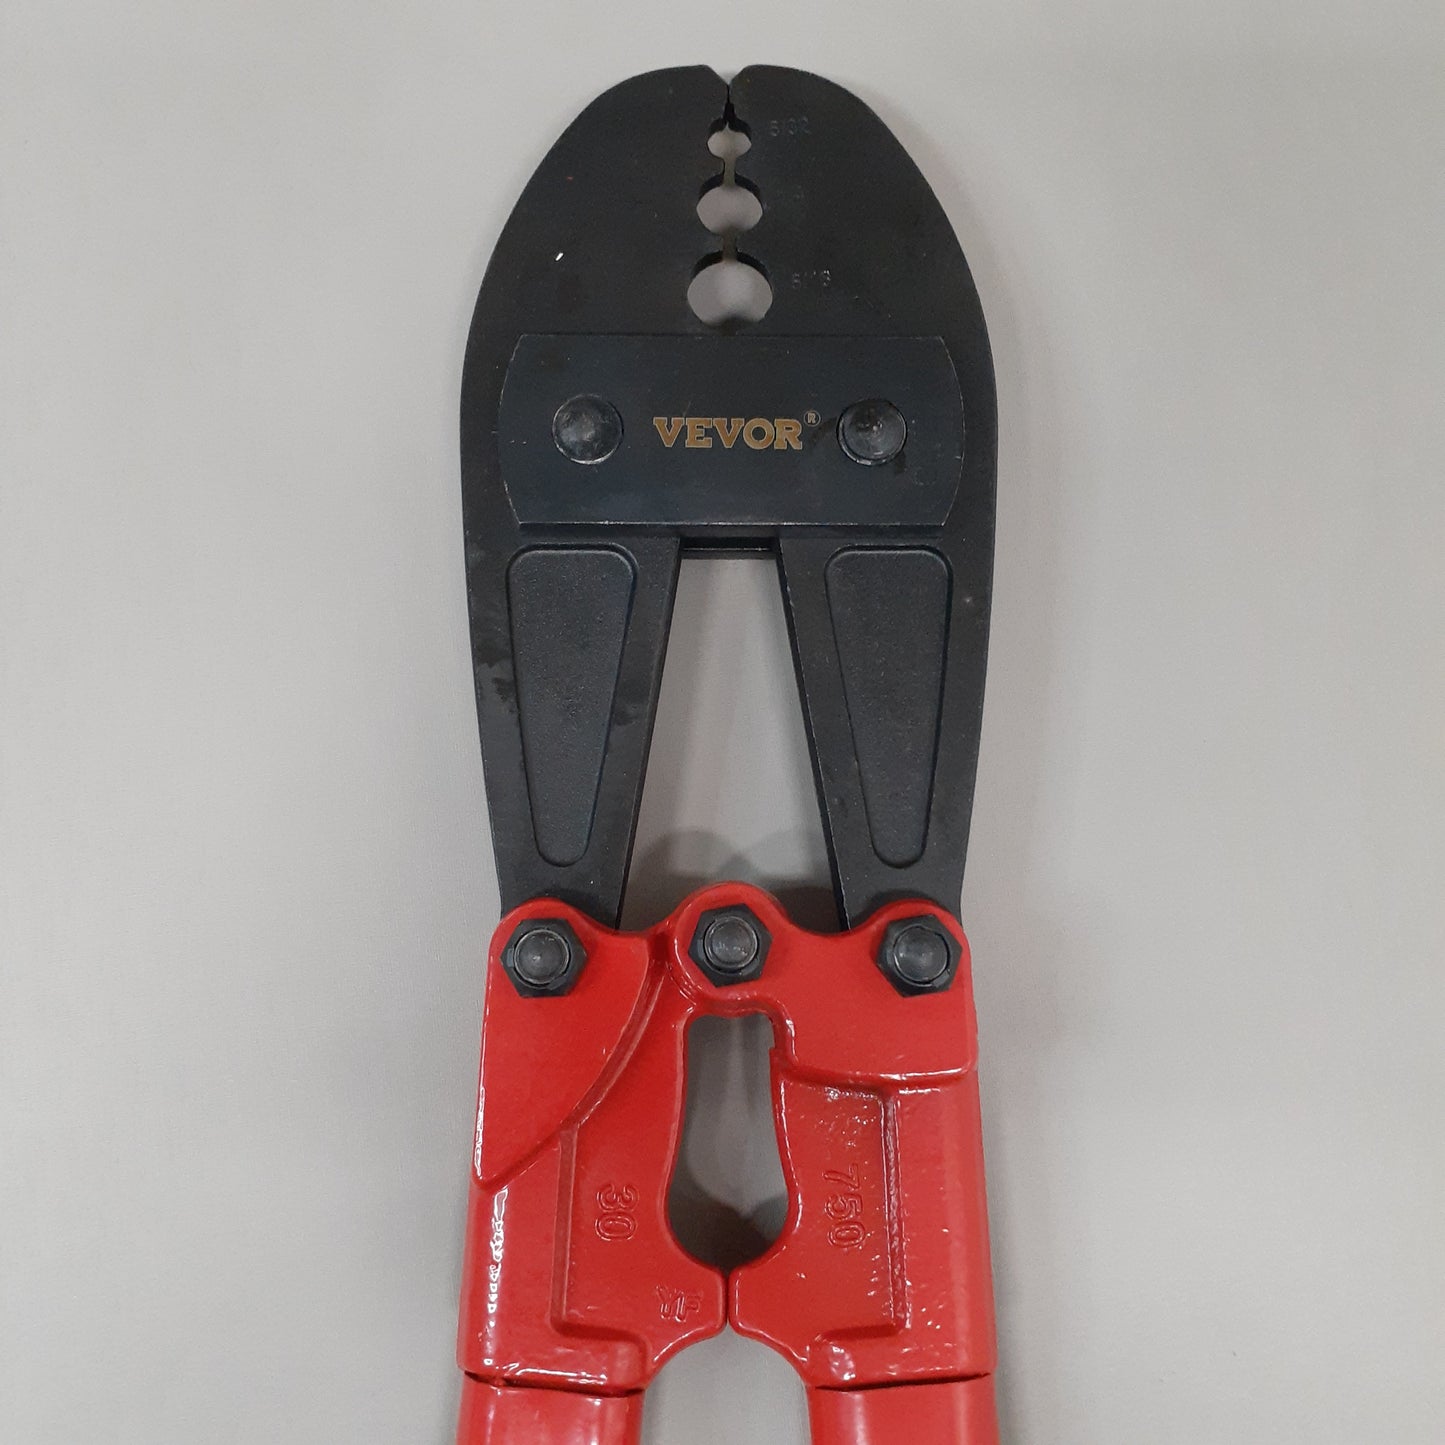 VEVOR Hand Swagger Crimper 30 Inch Swaging Tool for 5/32" 1/4" 5/16" (New Other)